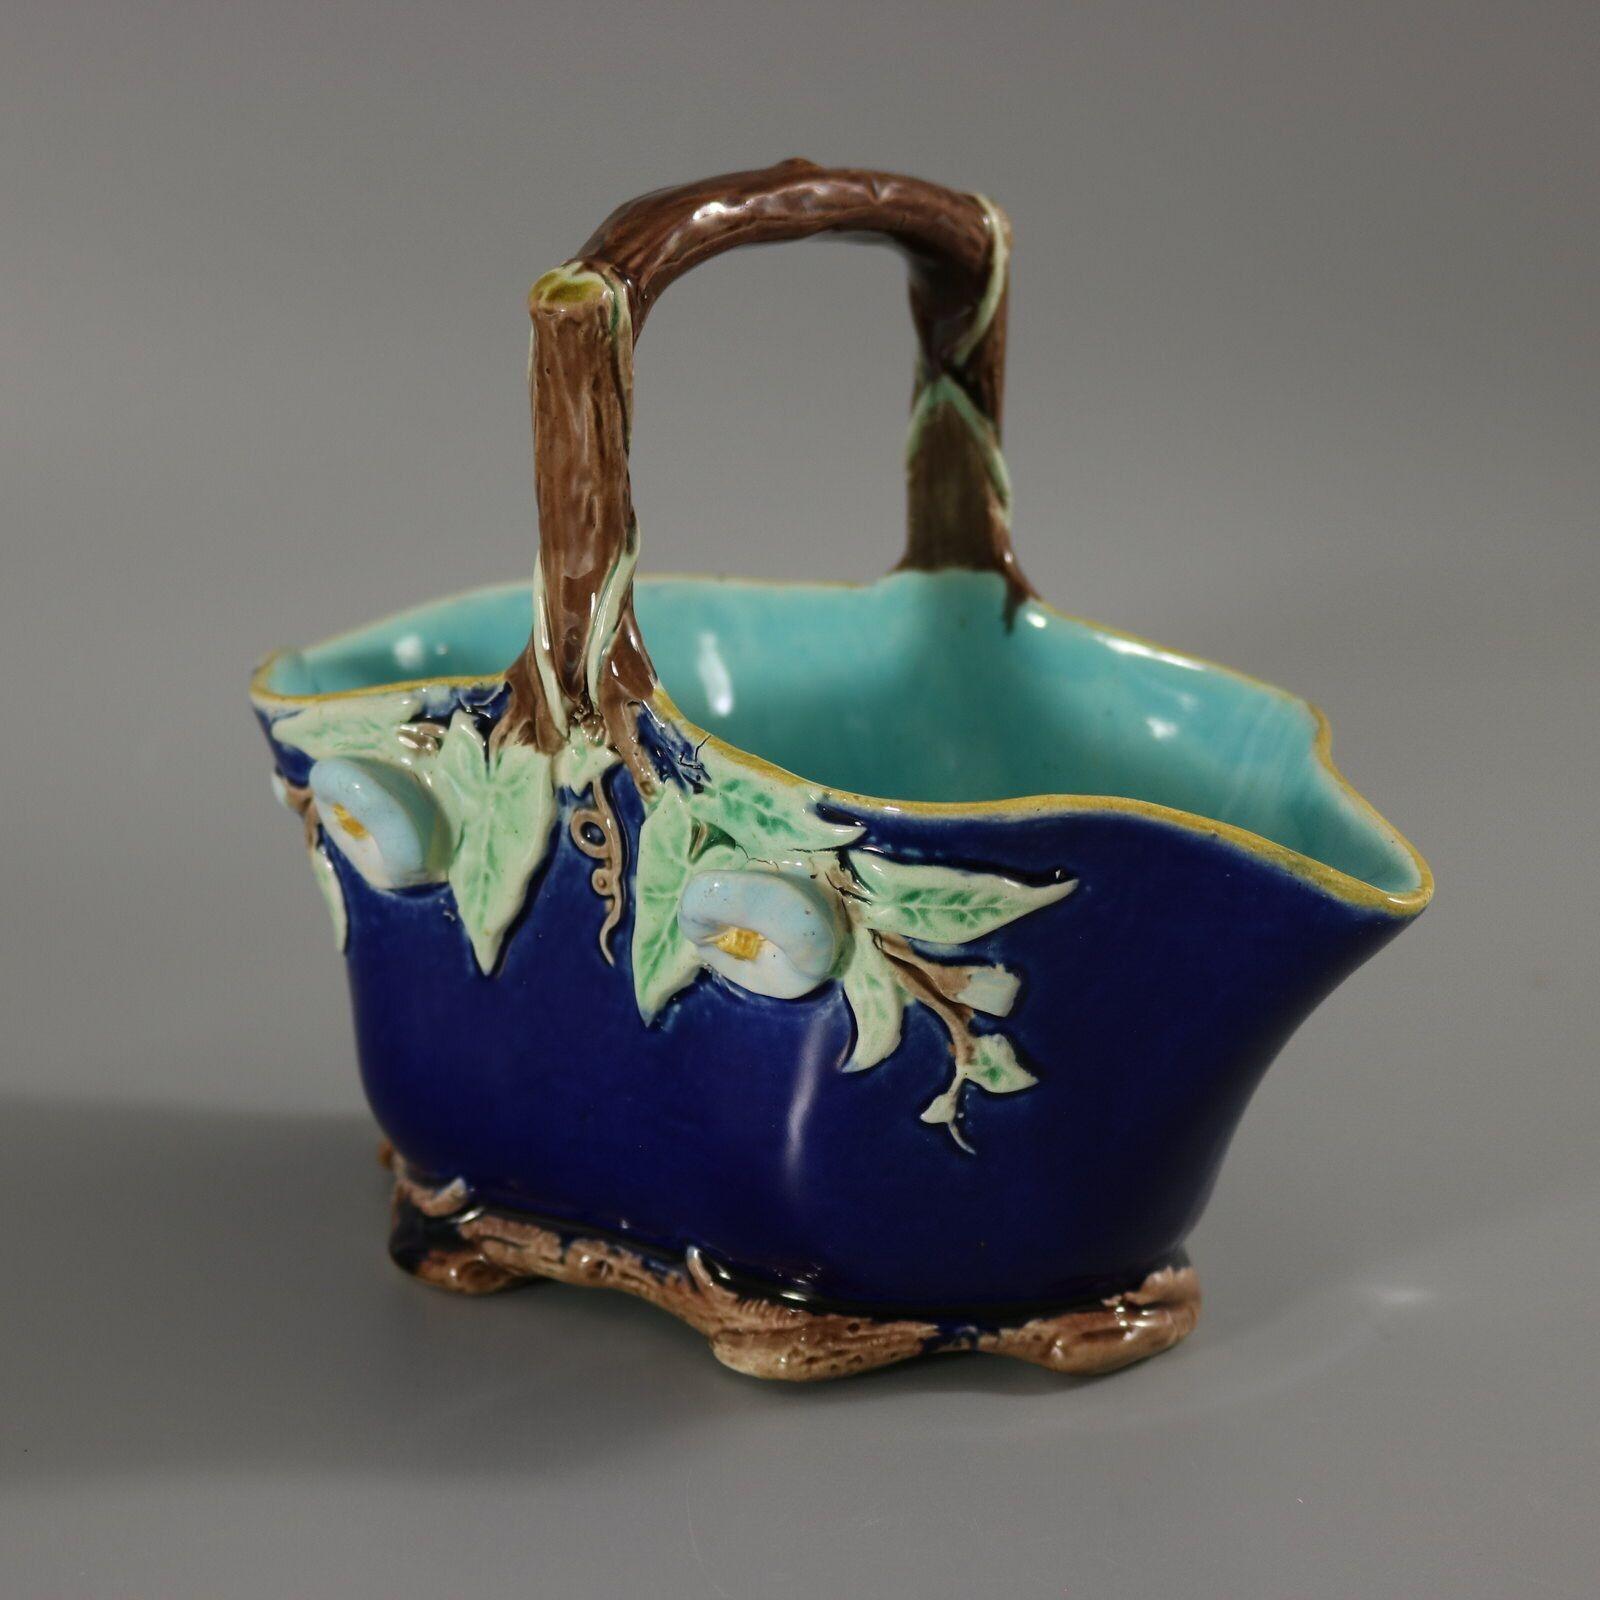 Holdcroft Majolica basket which features flowers and leaves hanging from the branch-like handle. Cobalt blue ground version. Colouration: cobalt blue, green, brown, are predominant. The piece bears maker's marks for the Holdcroft pottery.